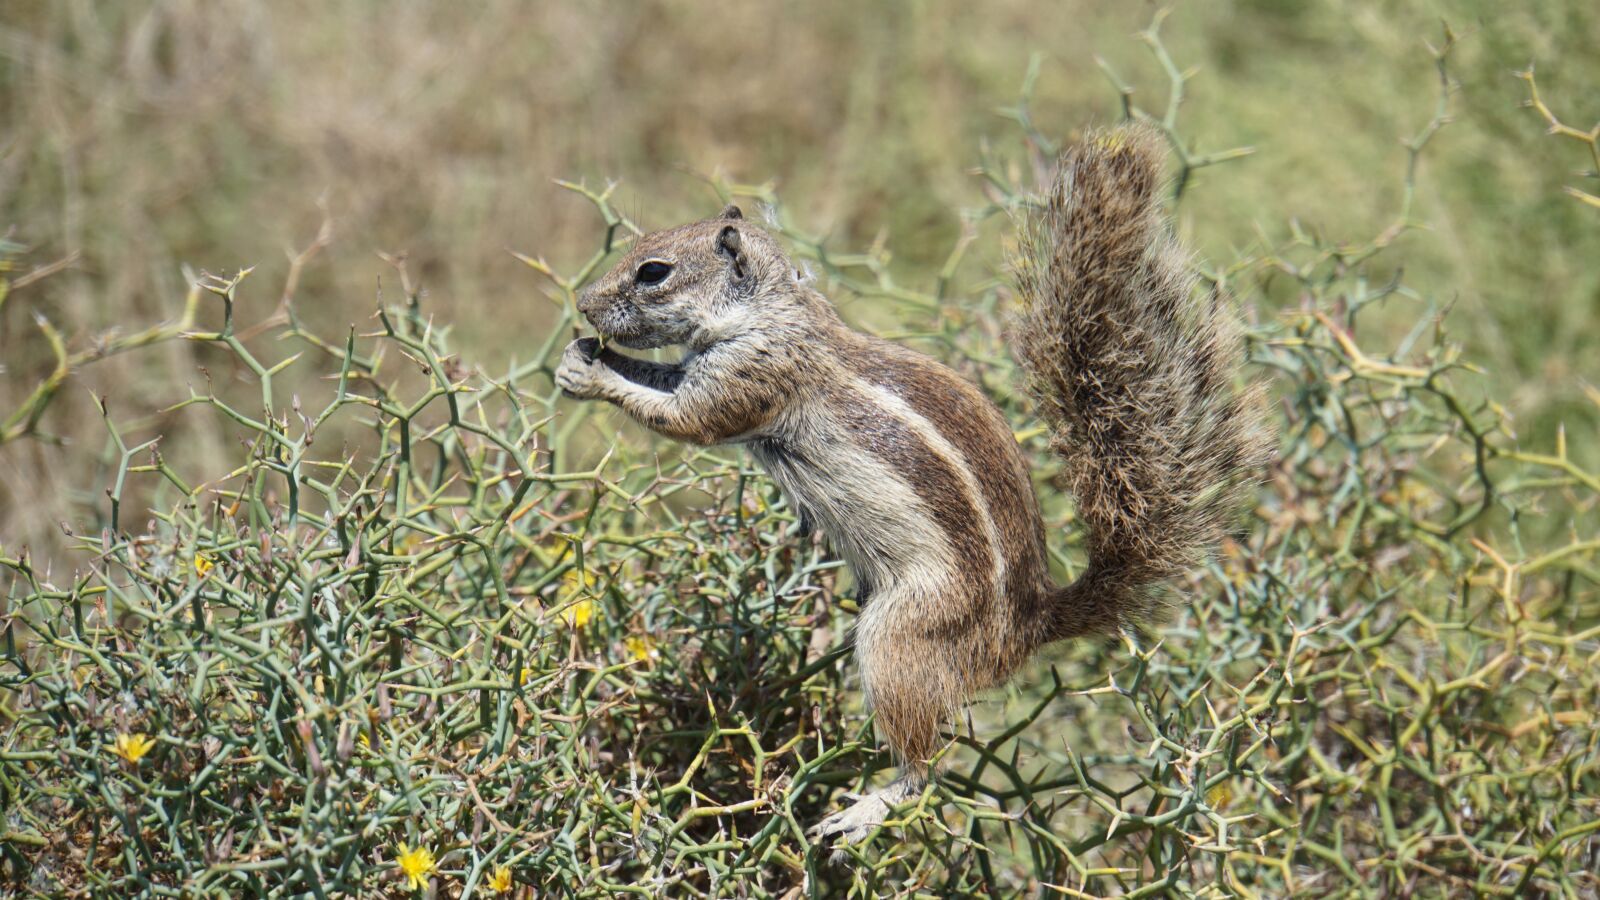 Sony a6000 sample photo. Chipmunk, nager, fuerteventura photography